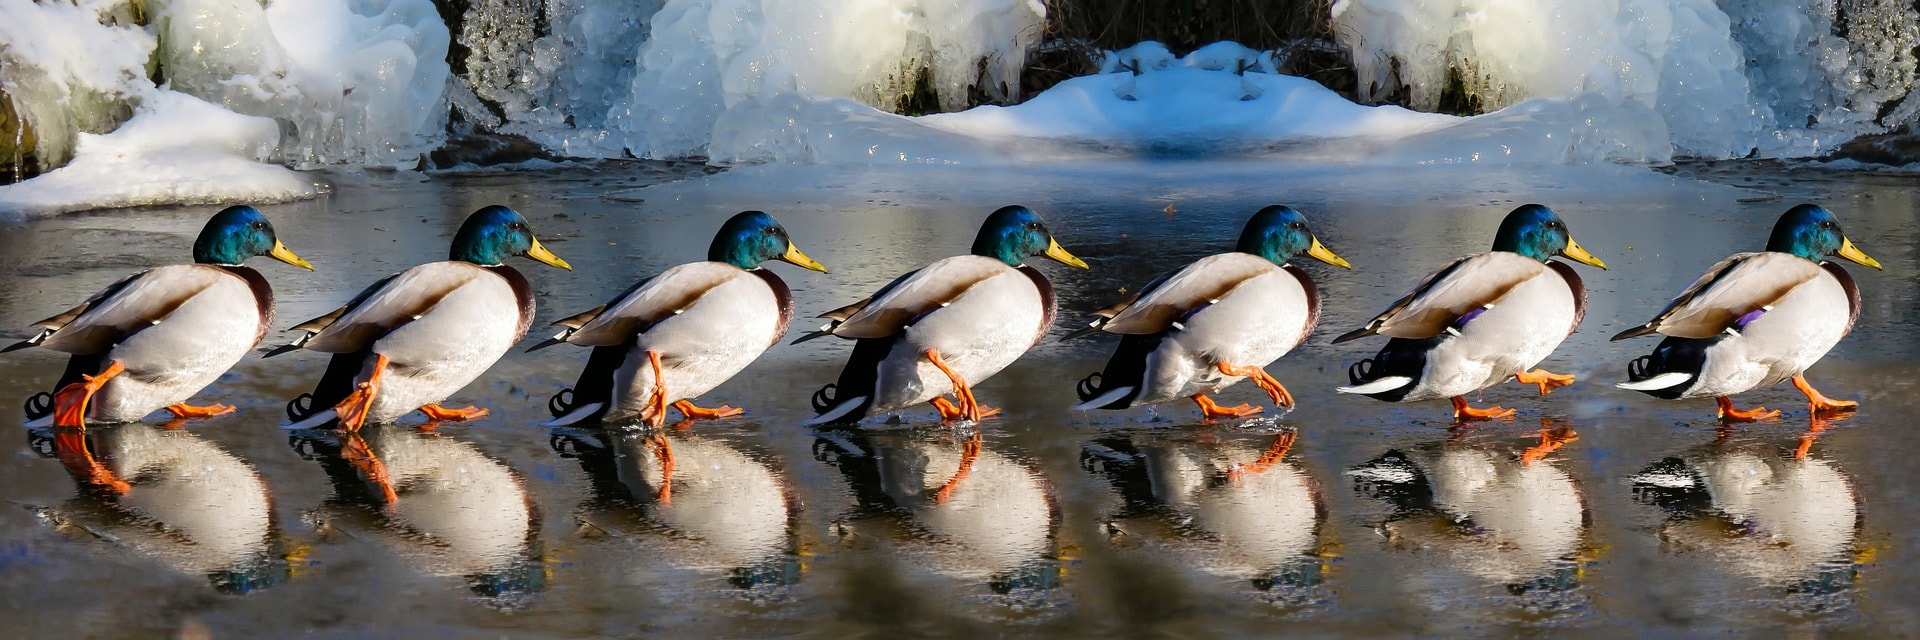 A row of 7 mallard ducks walk through icy water in front of snow and ice.